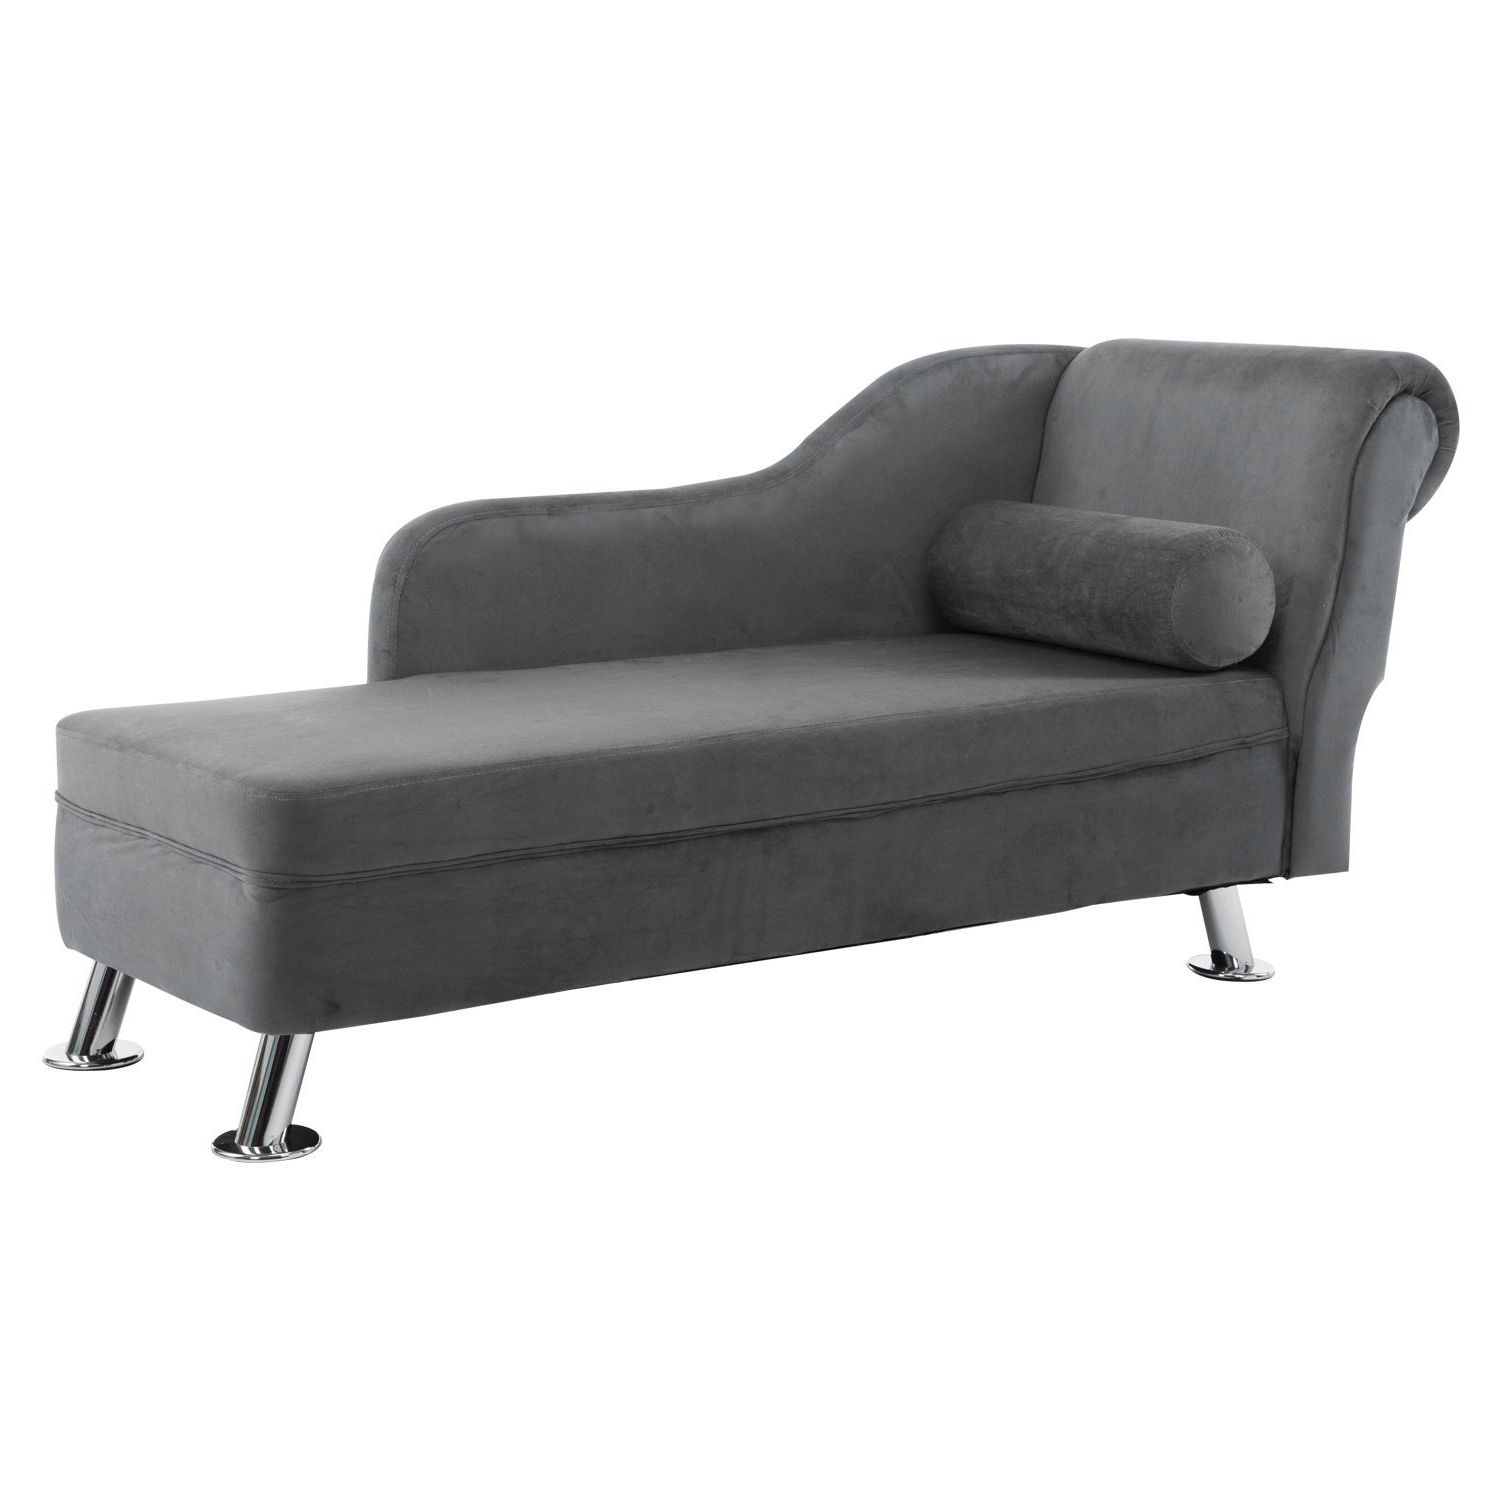 Preferred Chaise Lounge Beds Inside Homcom Deluxe Chaise Longue Designer Retro Vintage Style Sofa (View 12 of 15)